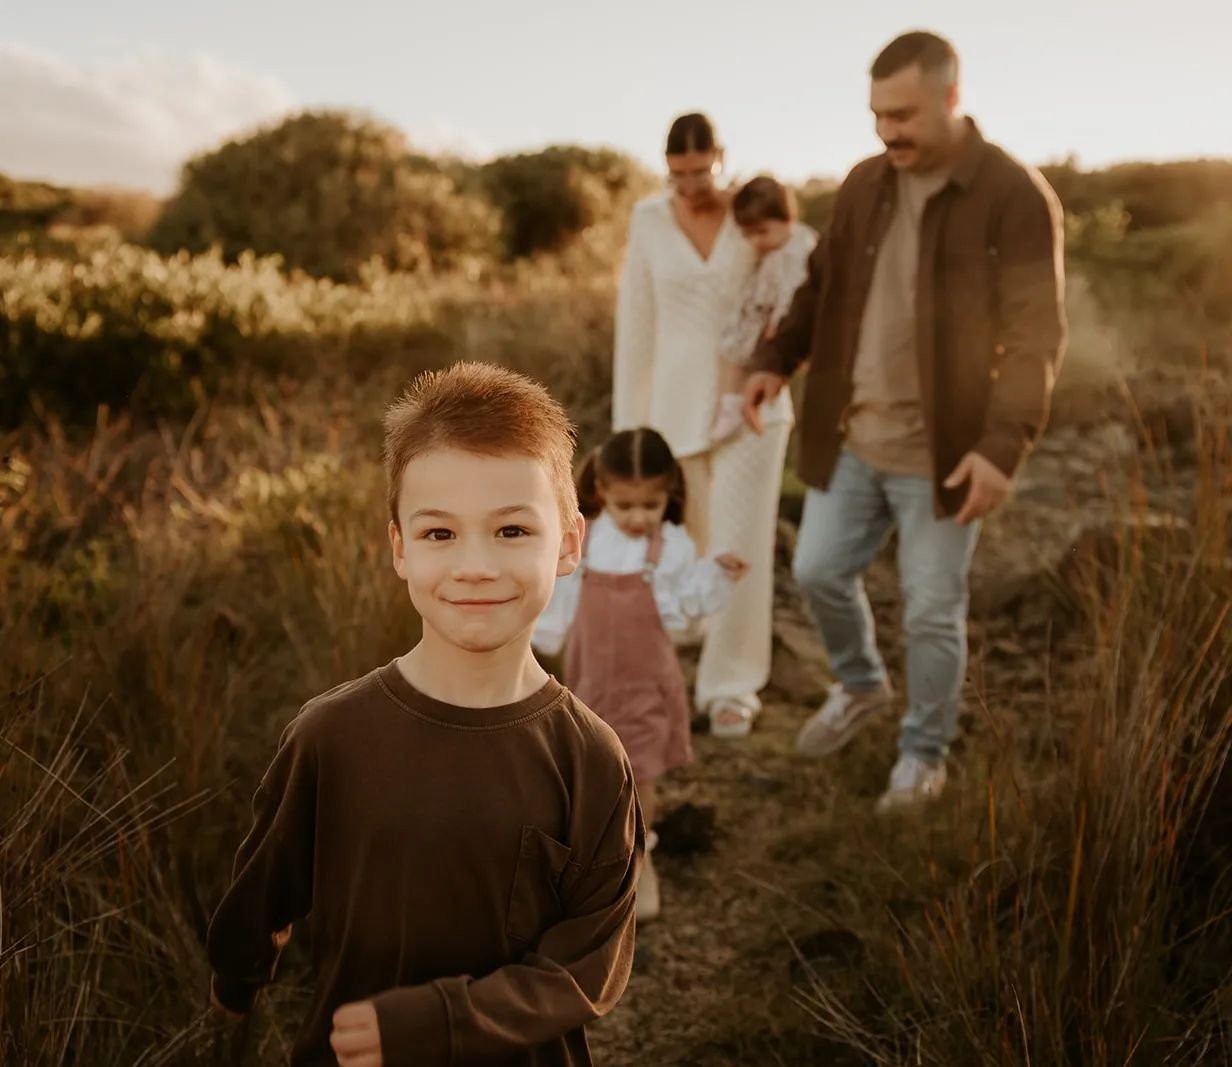 Adventure fam sessions
The other night 🌙 ✨️ 
What a beautiful sunset it was for this loving little fam 🥰